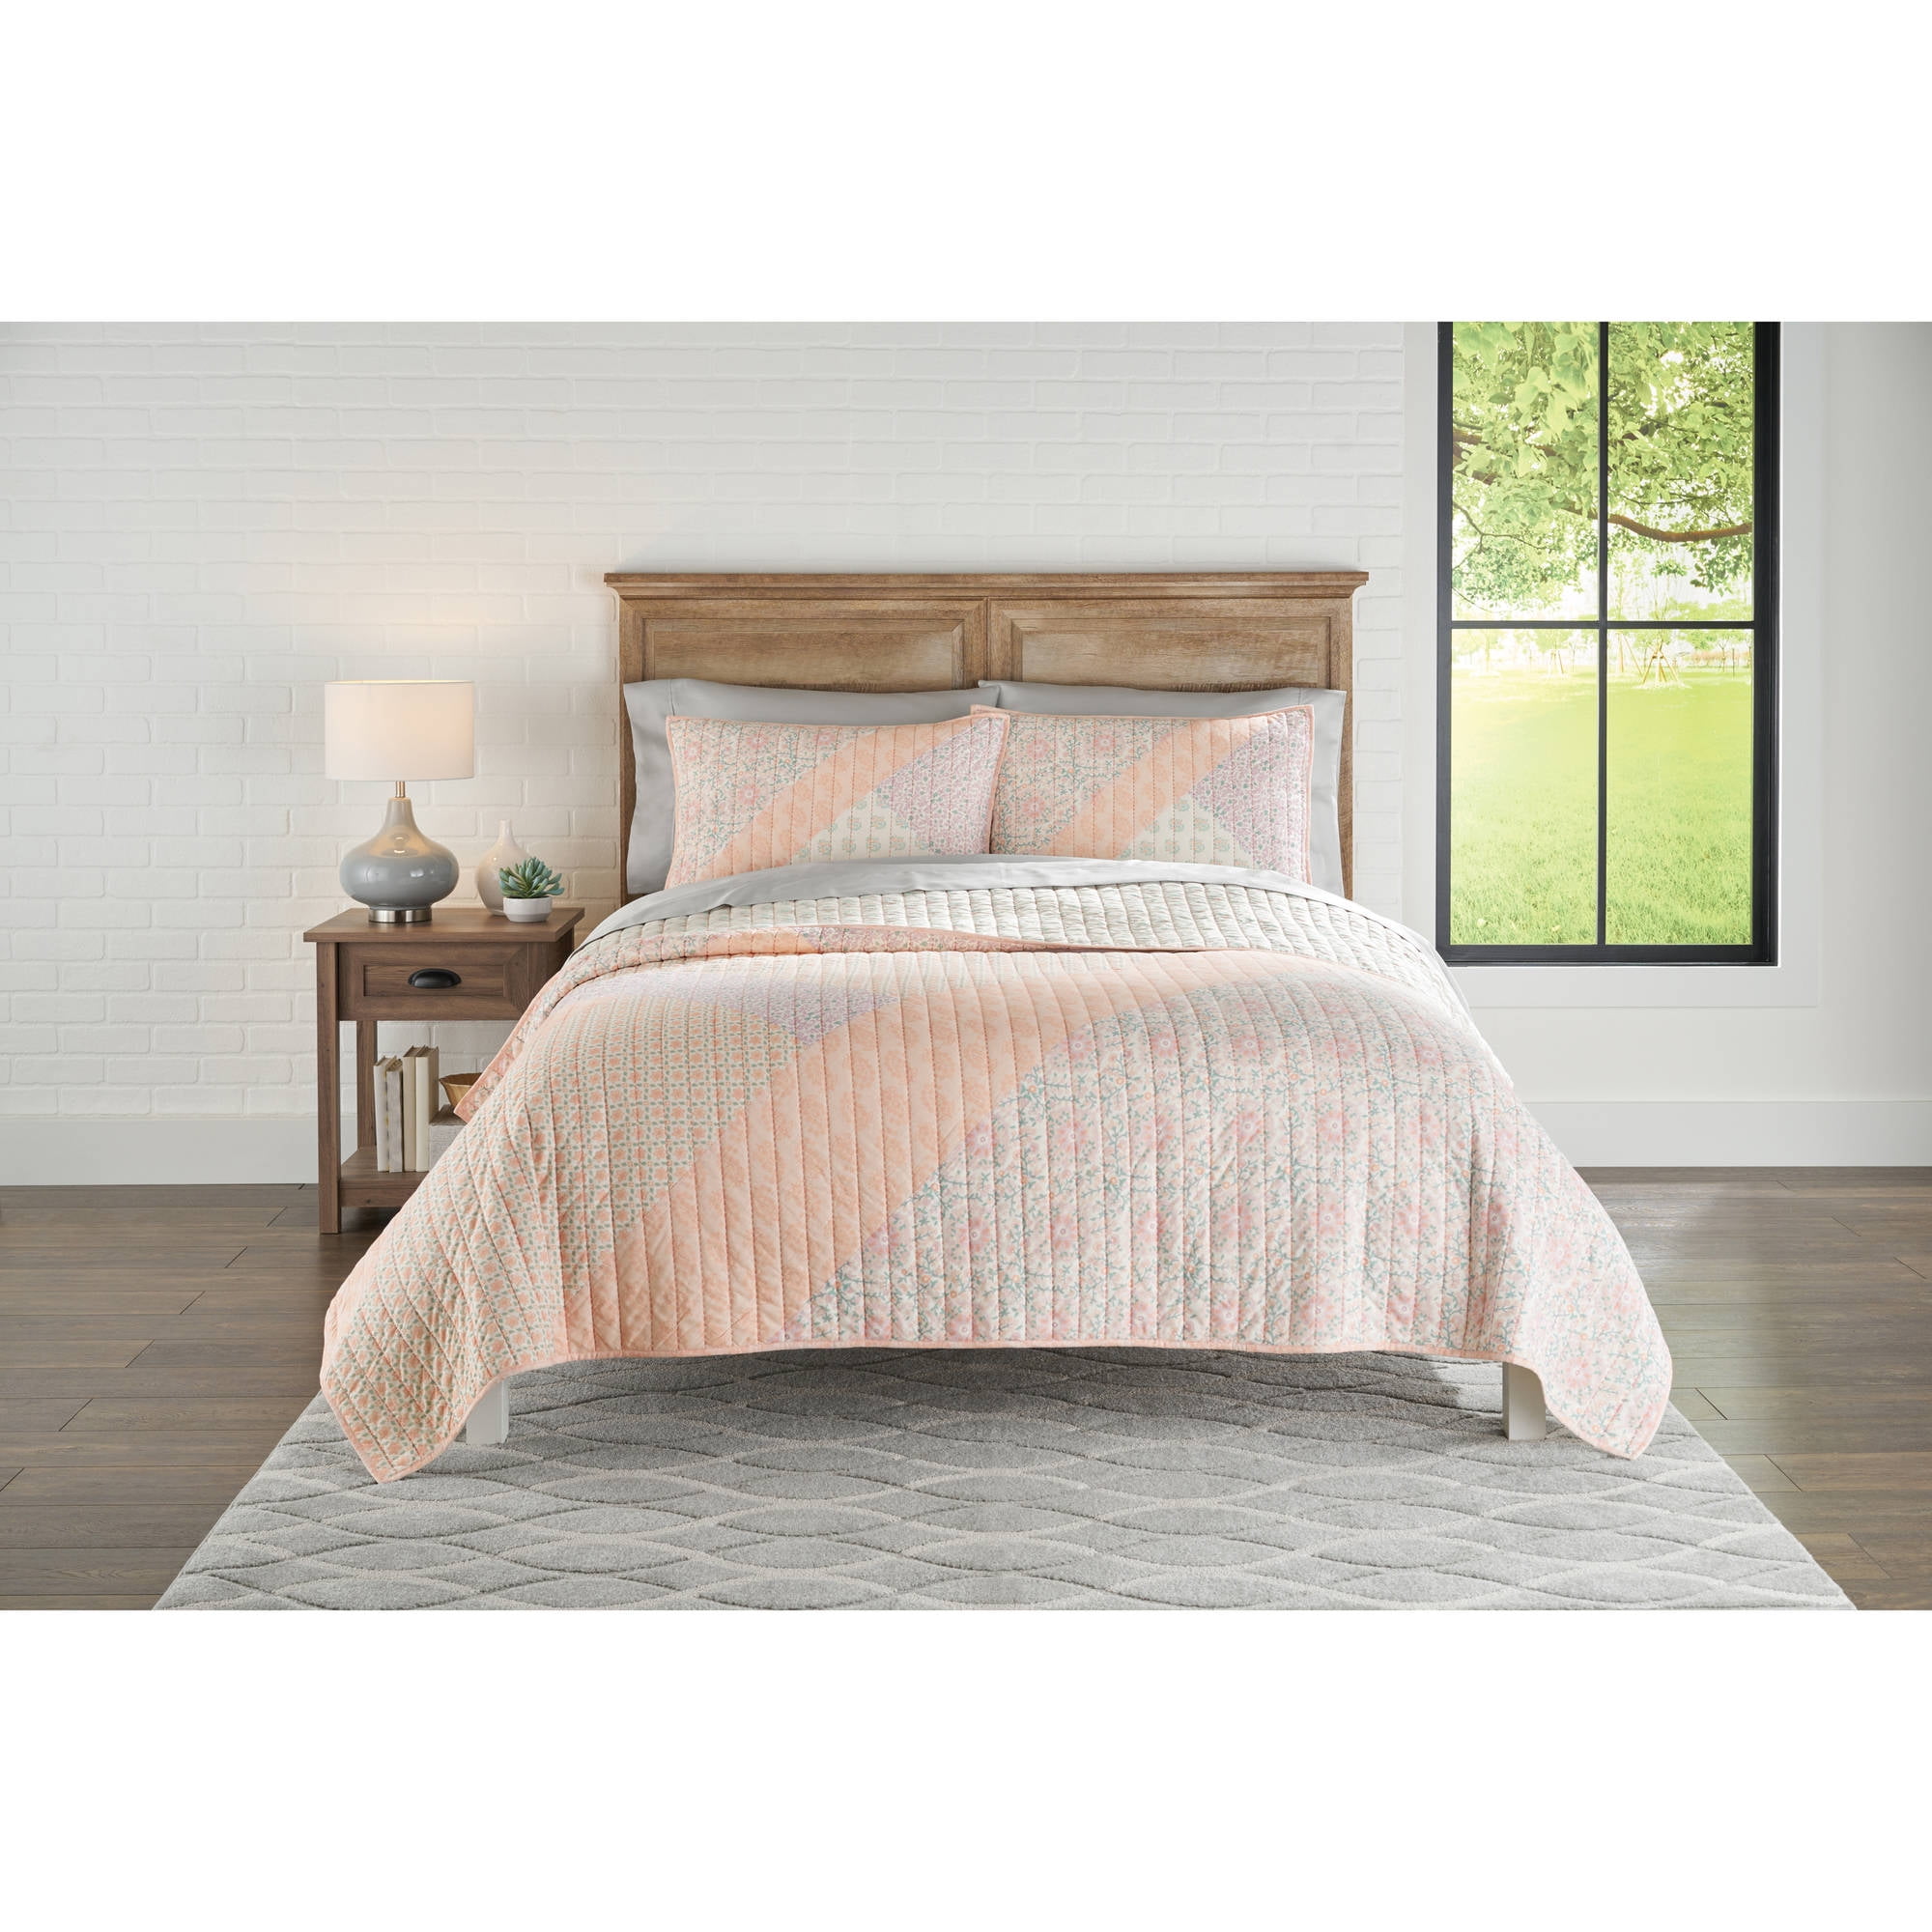 Queen  size machine pieced and quilted Patchwork quilt #NJ-77-9-7A-4a 